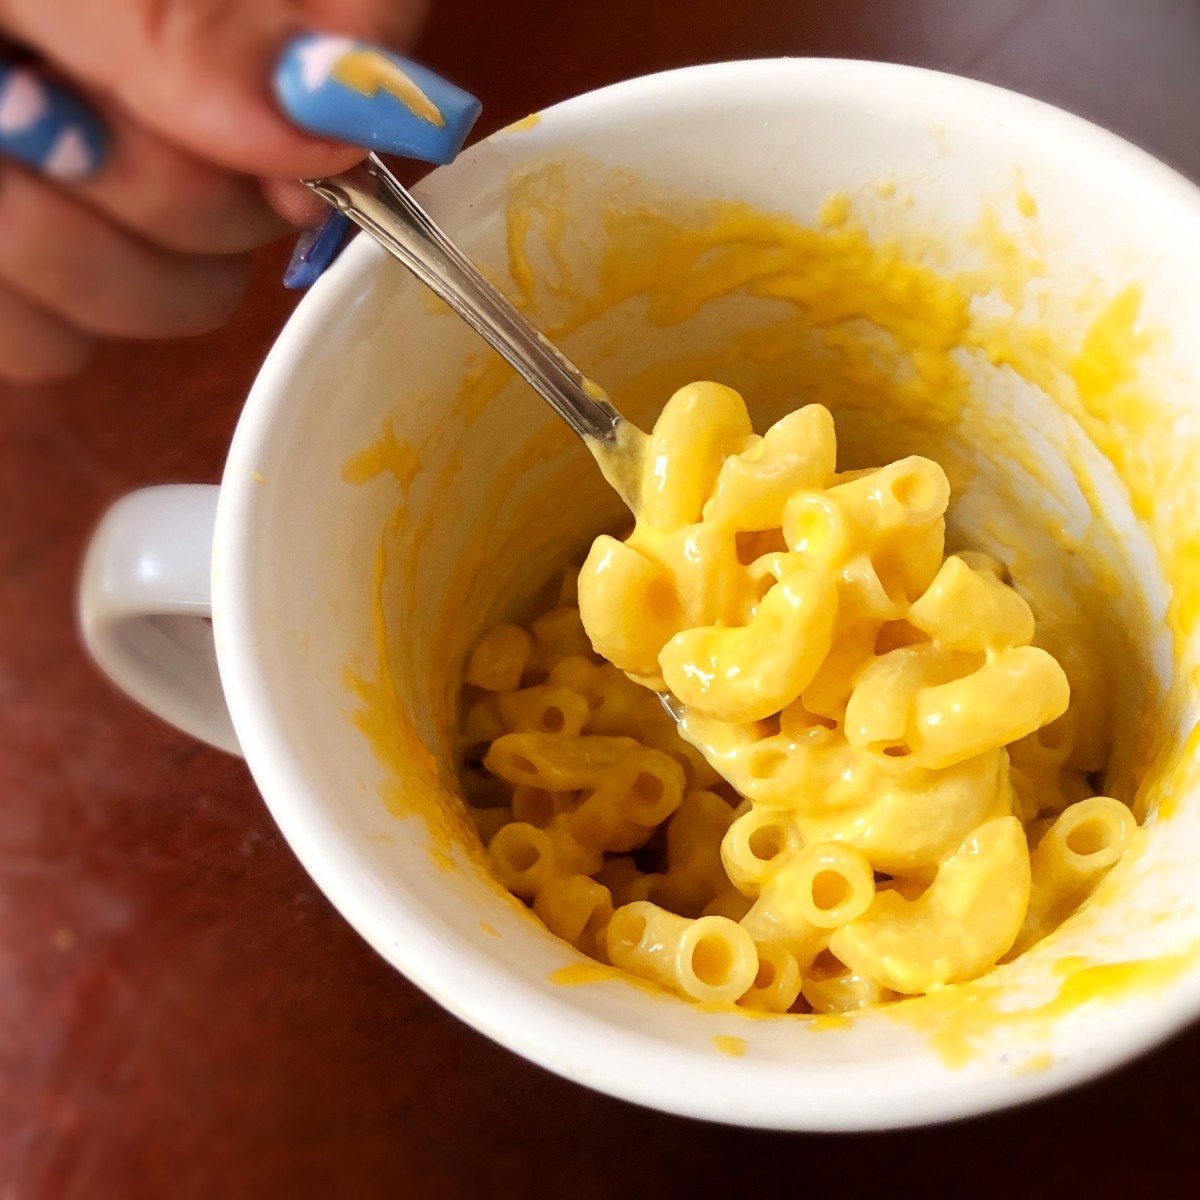 how to make mac n cheese thicker